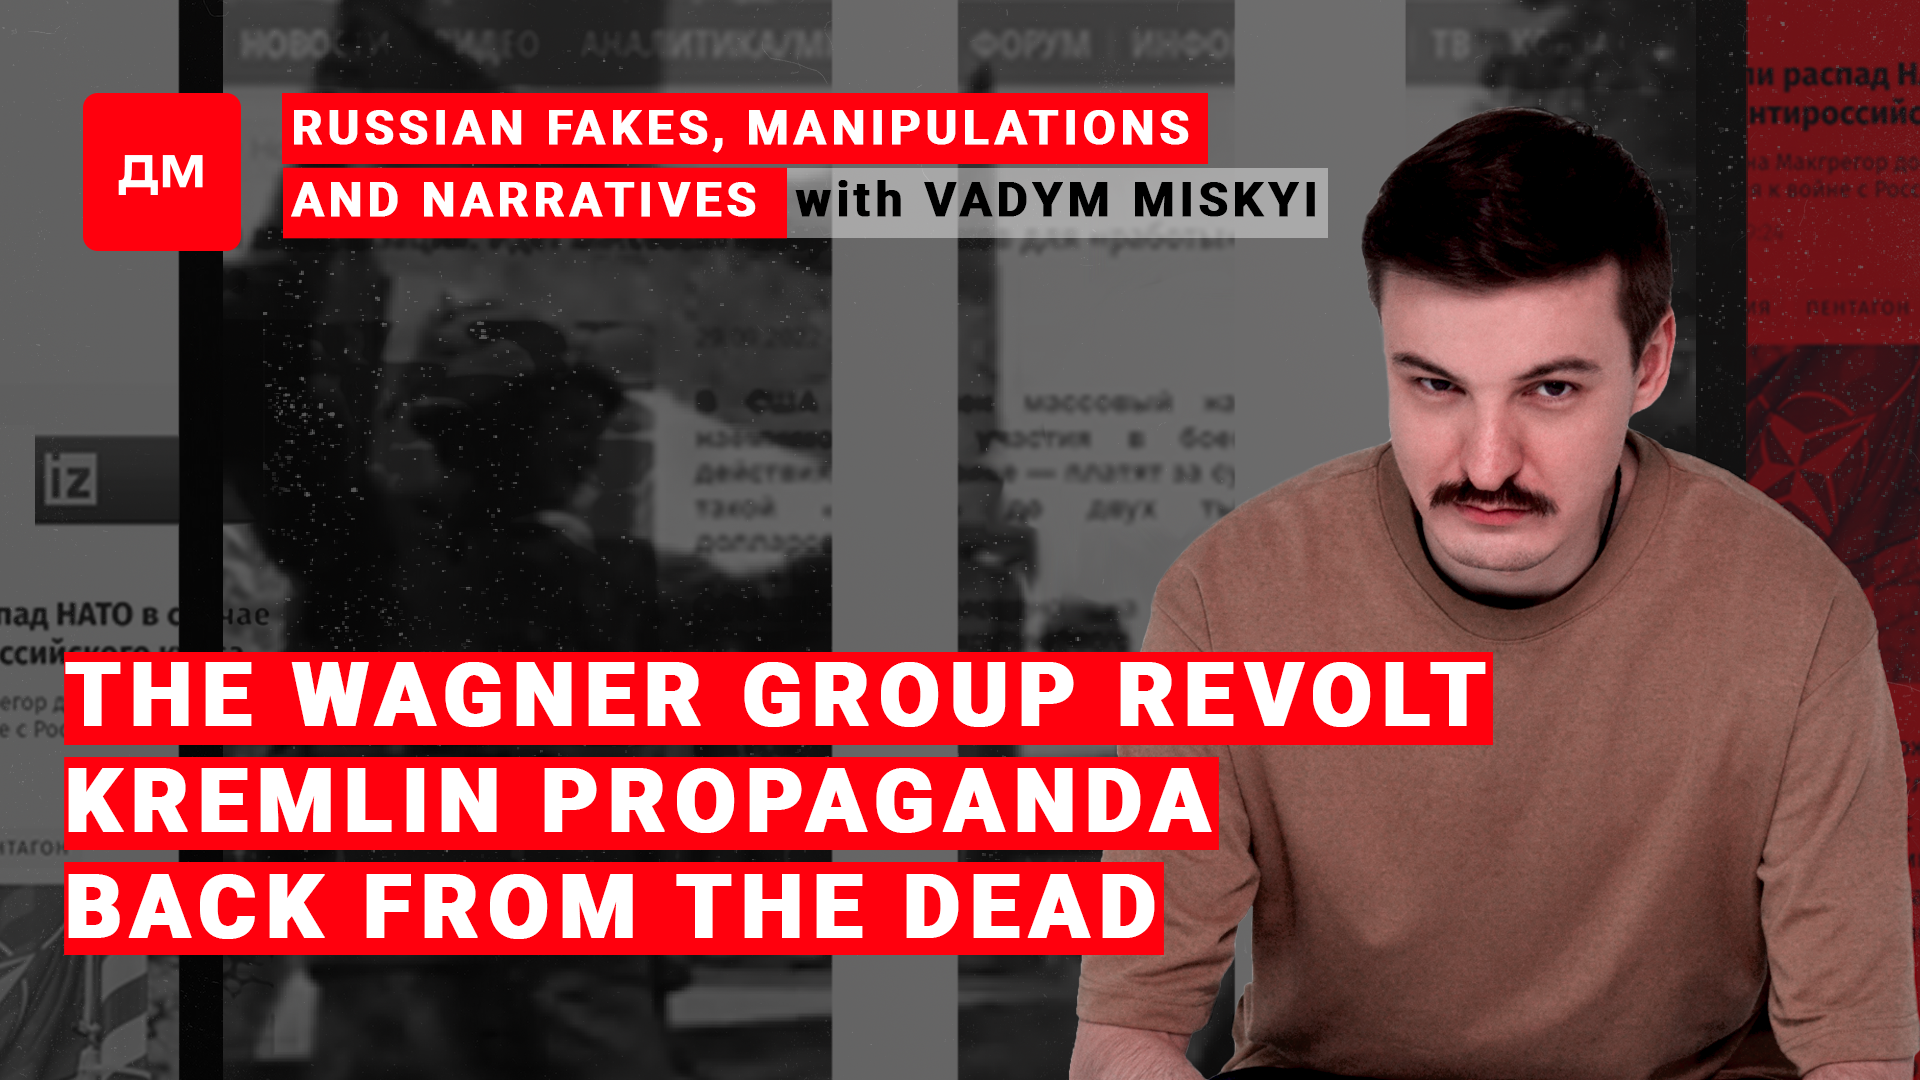 Image: Russian fakes, manipulations and narratives / Briefing by Vadym Miskyi #12/Season II